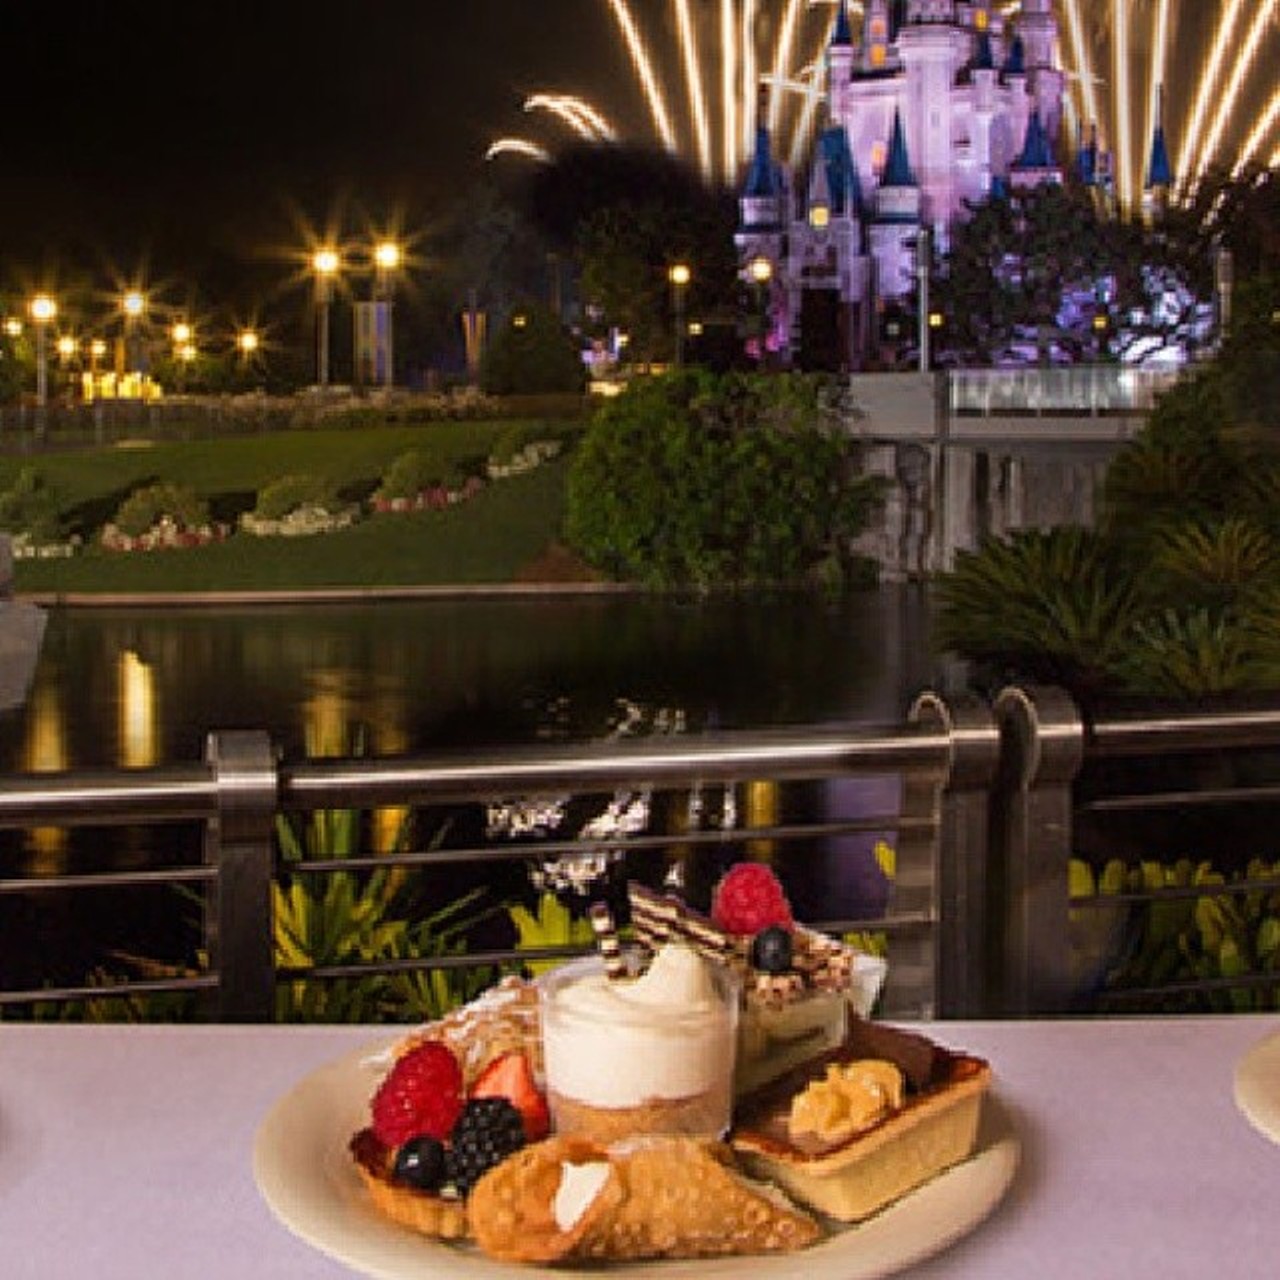 Finding a good seat to catch the evening fireworks can be a huge headache, but if you reserve a seat at the Tomorrowland Terrace fireworks dessert party, you can sample unlimited desserts and enjoy the best seats available.